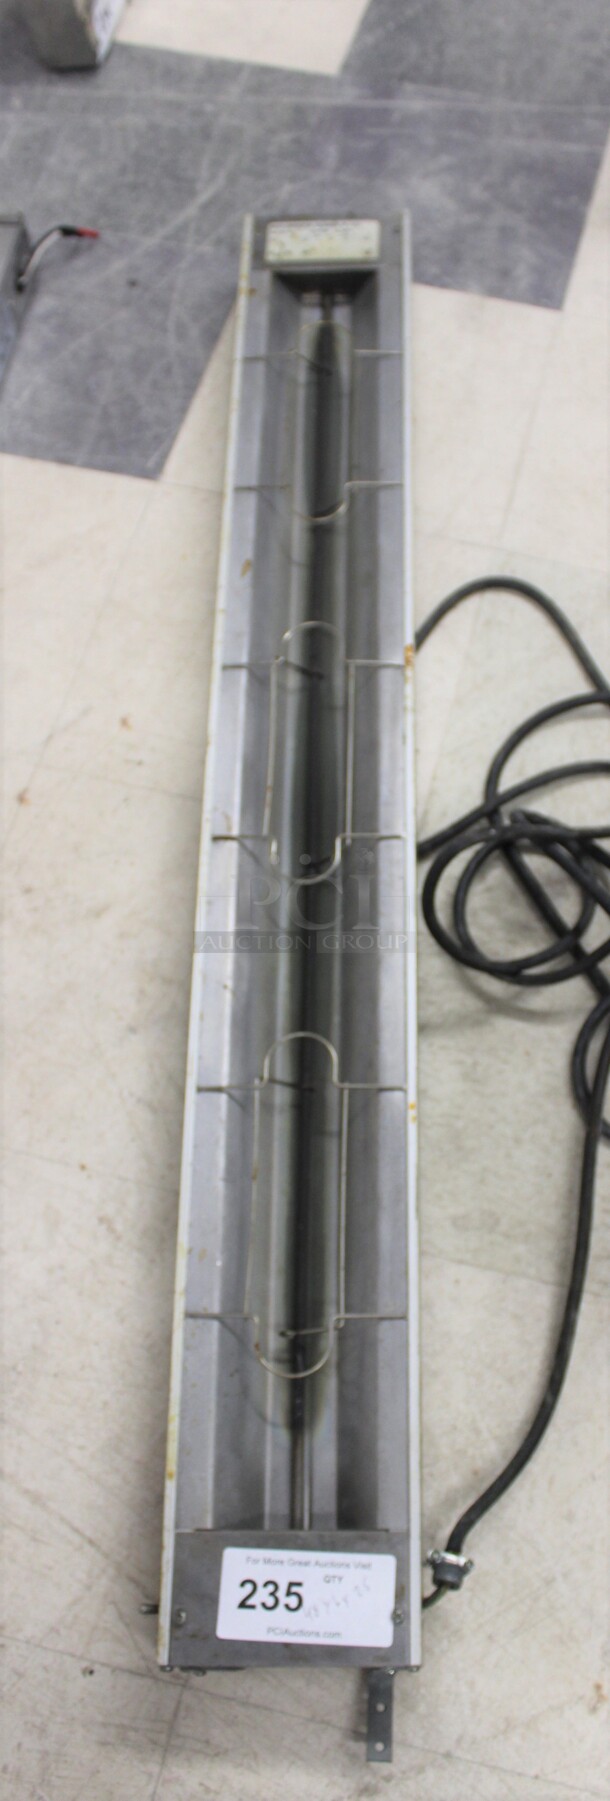 SUPER! Hatco Model GRAH-48 Commercial Stainless Steel Strip Warmer. 48x6x2.5. 120V/60Hz. Working When Removed!